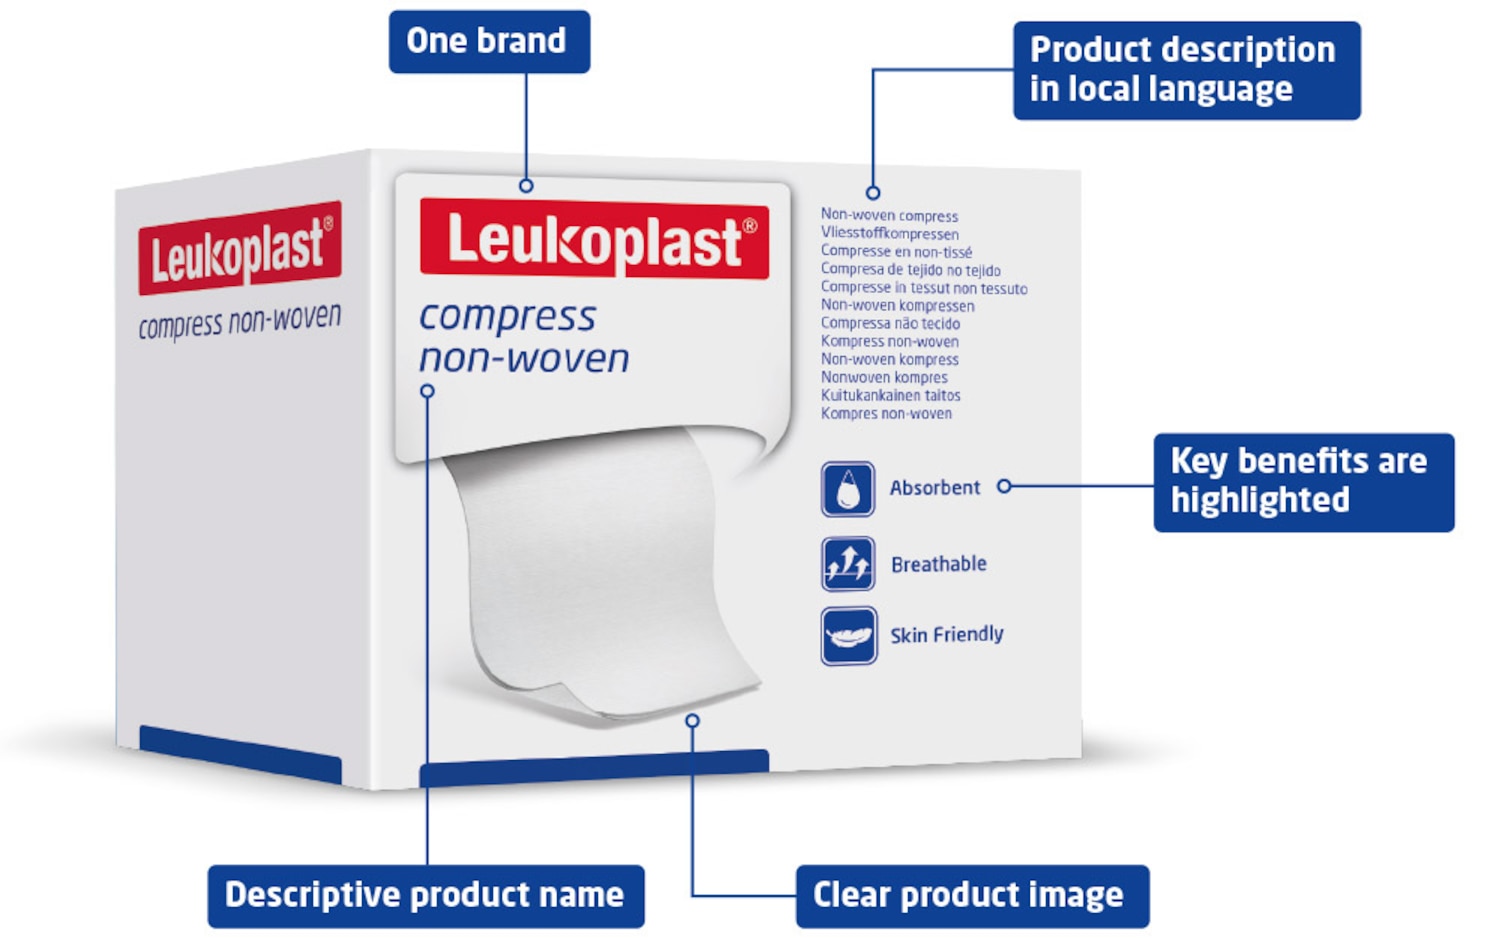 Picture of the Leukoplast compress non-woven box with descriptive boxes highlighting key design features.